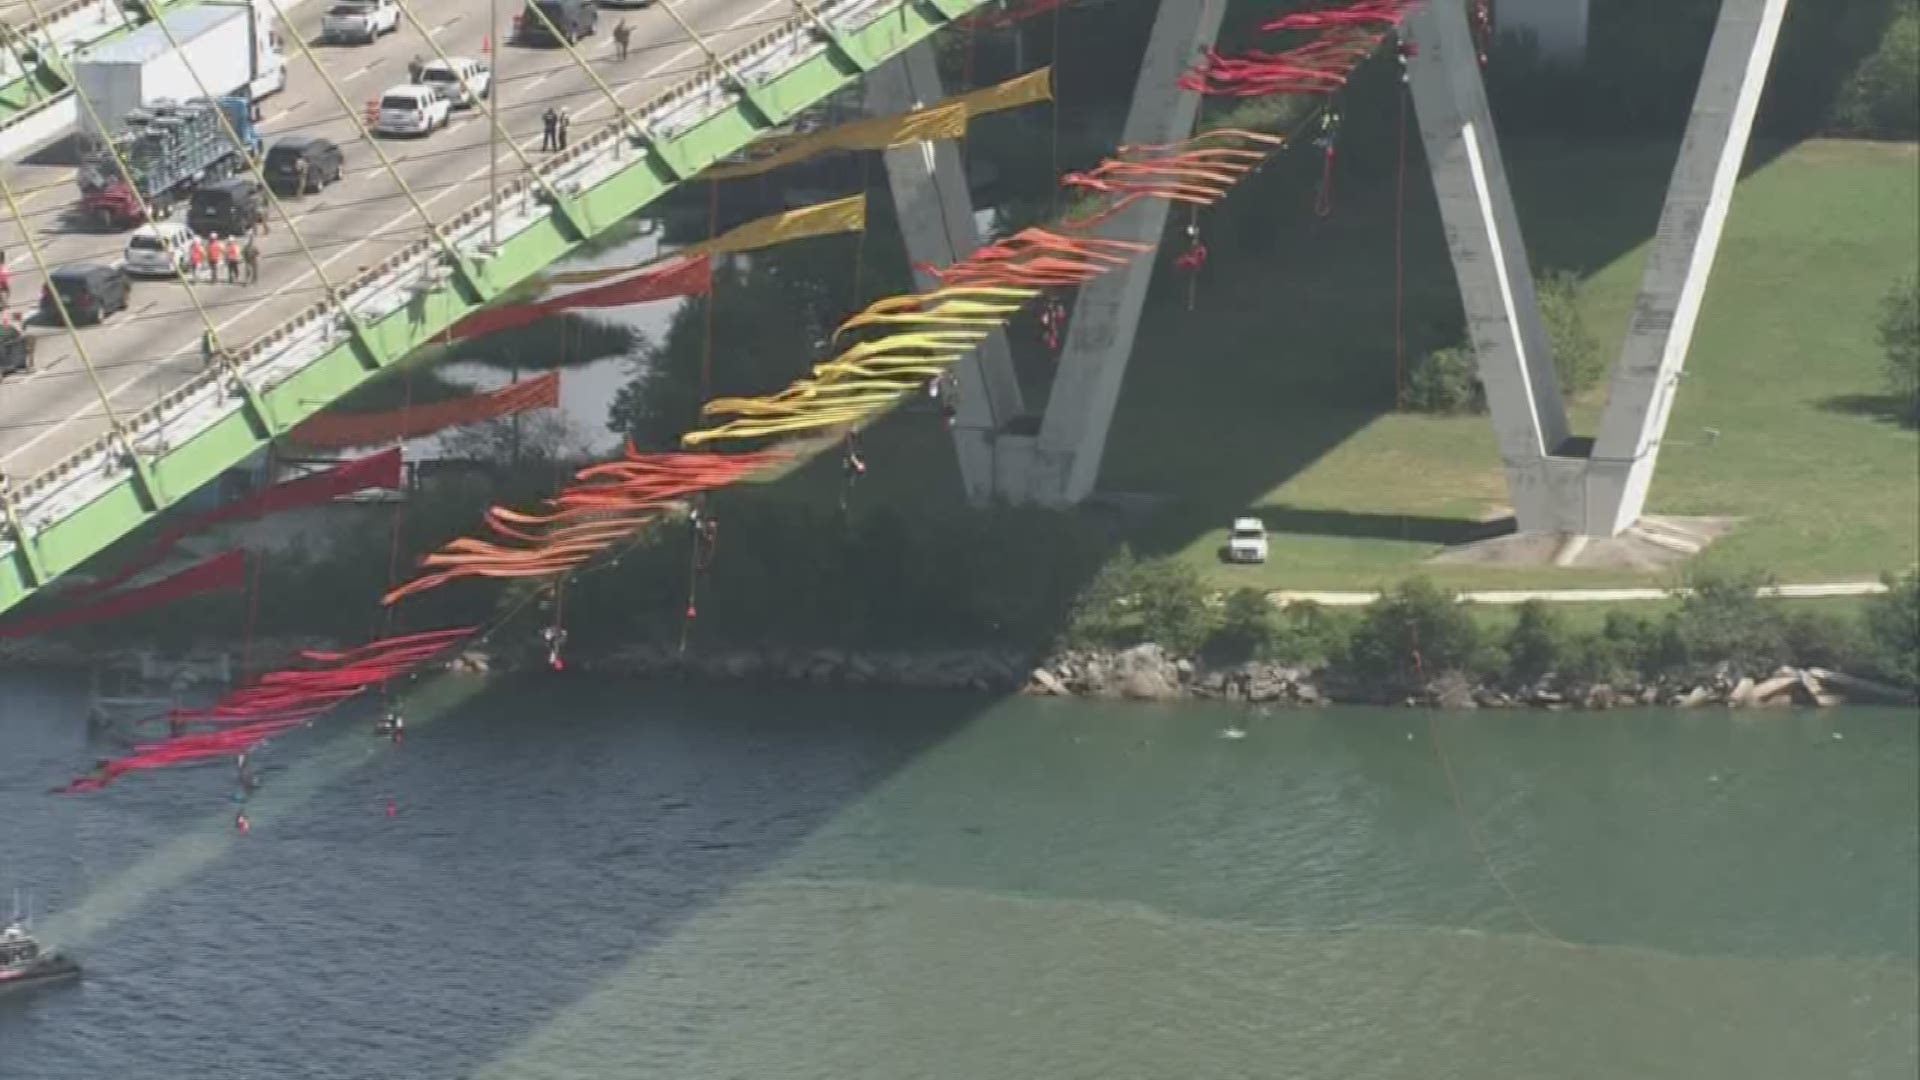 Greenpeace activists are hanging from the Fred Hartman Bridge in an effort to block traffic in the Houston Ship Channel.